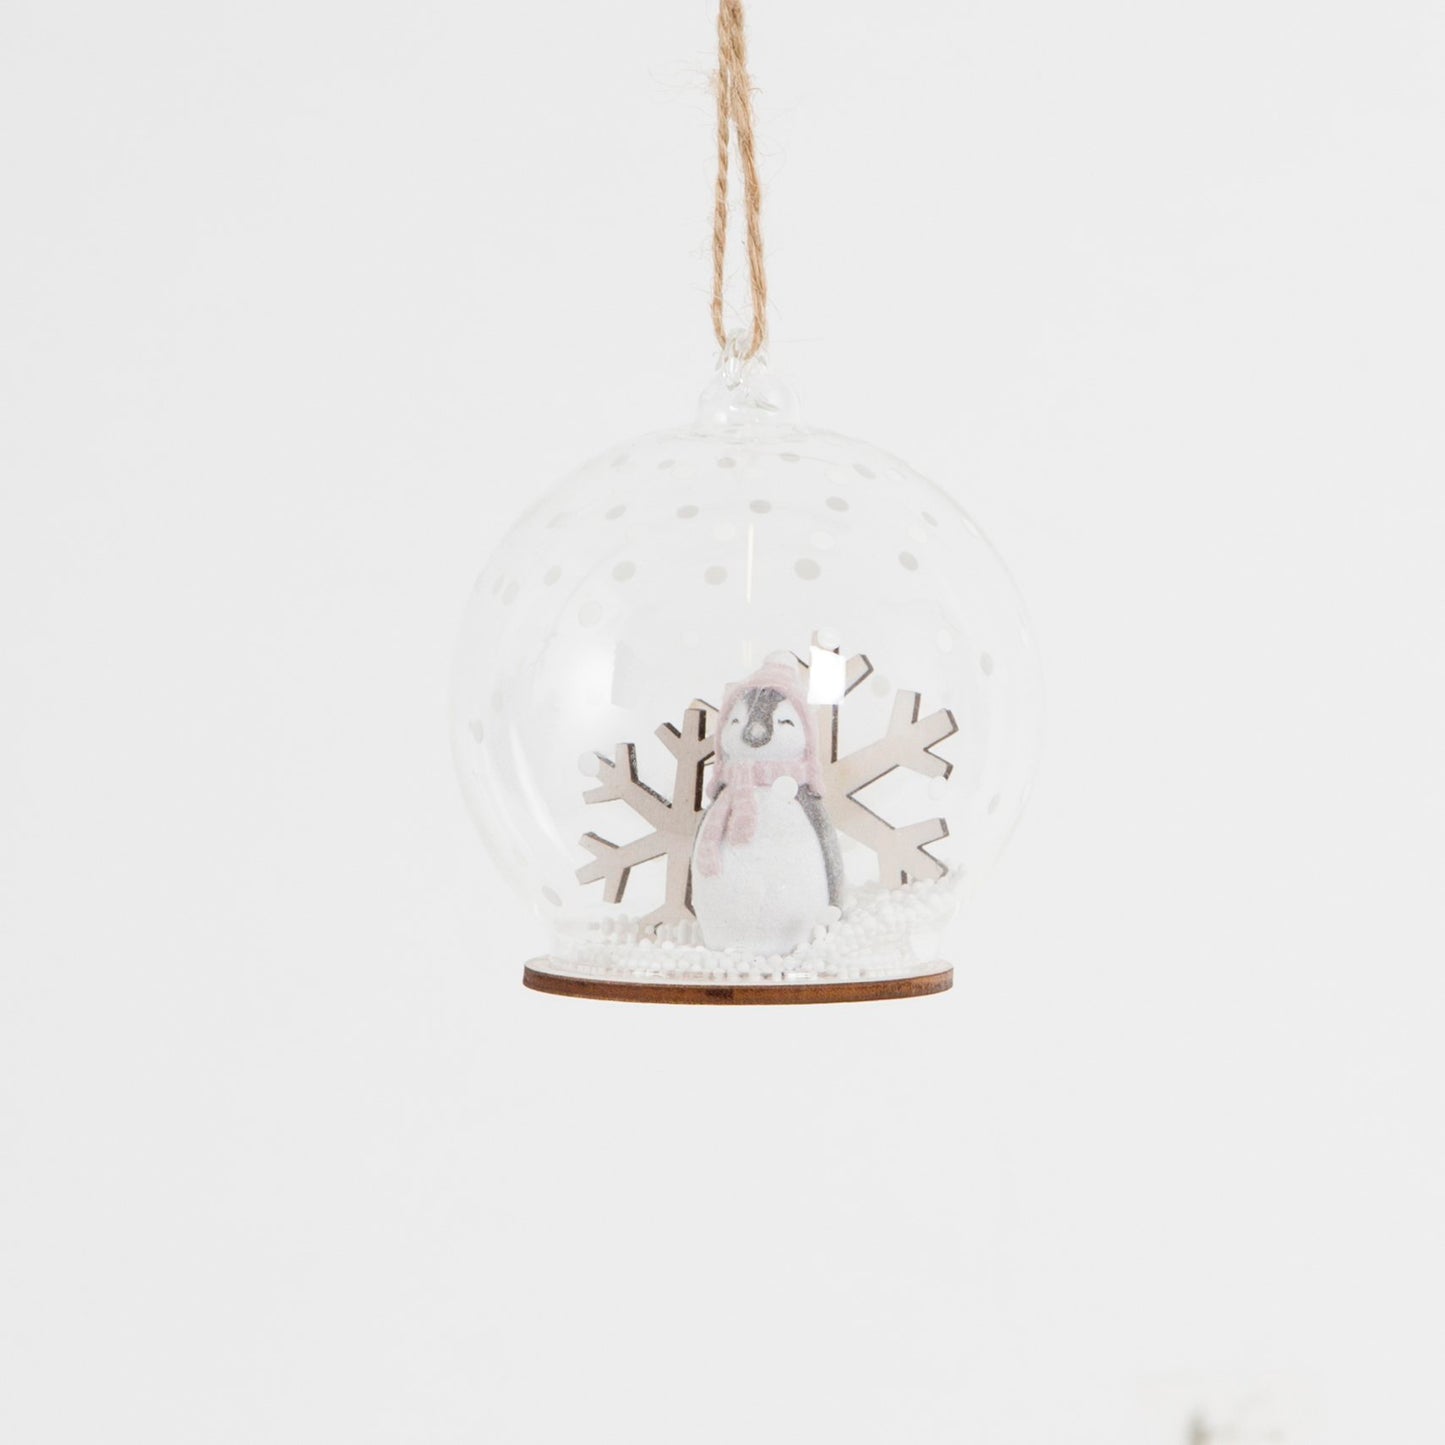 Allow yourself to dream with this cute penguin wearing a scarf in a snow scened snow dome glass Christmas tree decoration, complete with miniature snow balls!